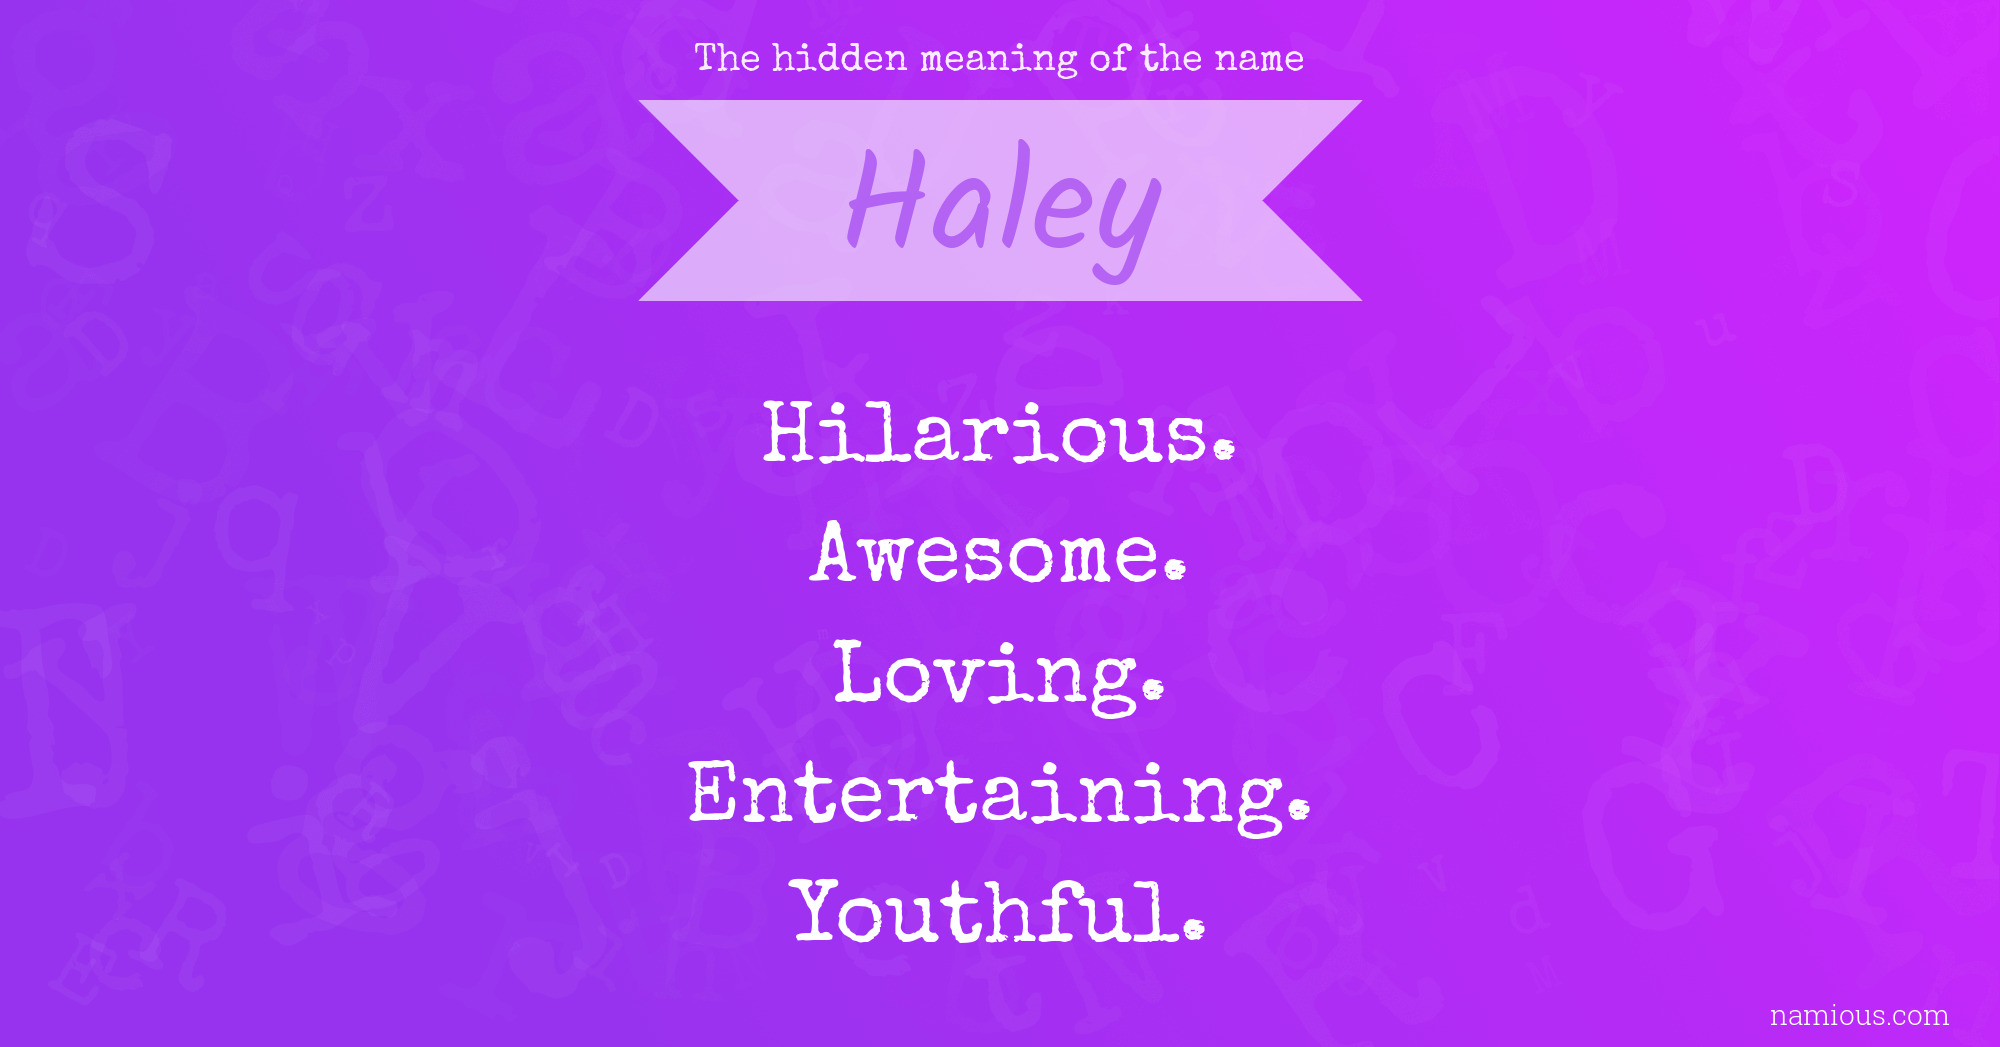 The hidden meaning of the name Haley